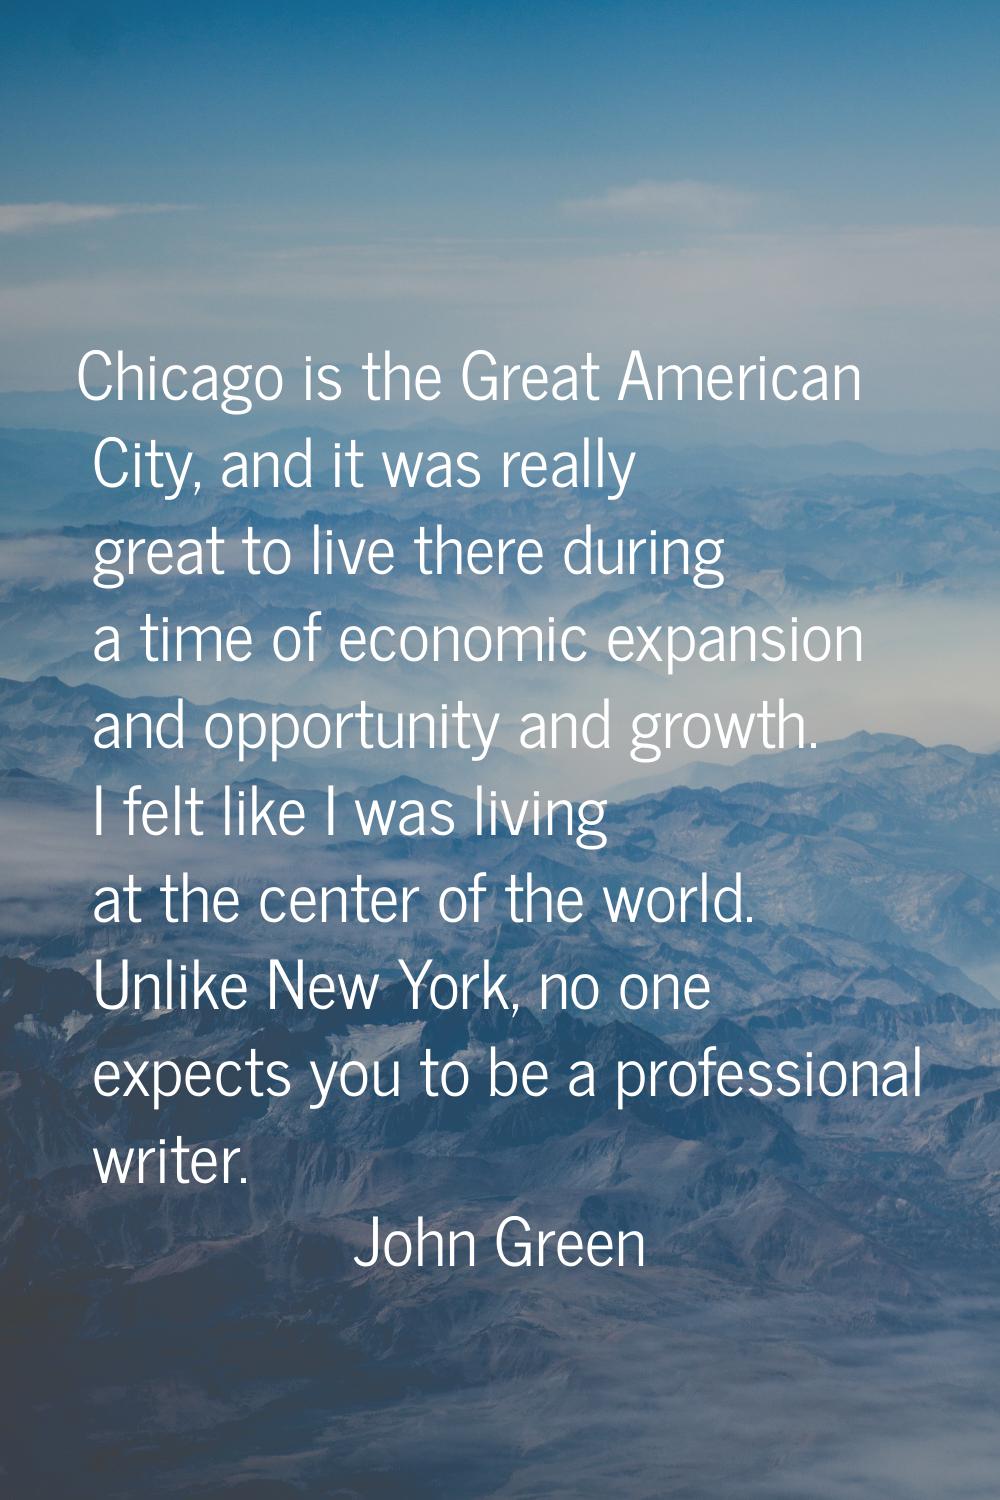 Chicago is the Great American City, and it was really great to live there during a time of economic